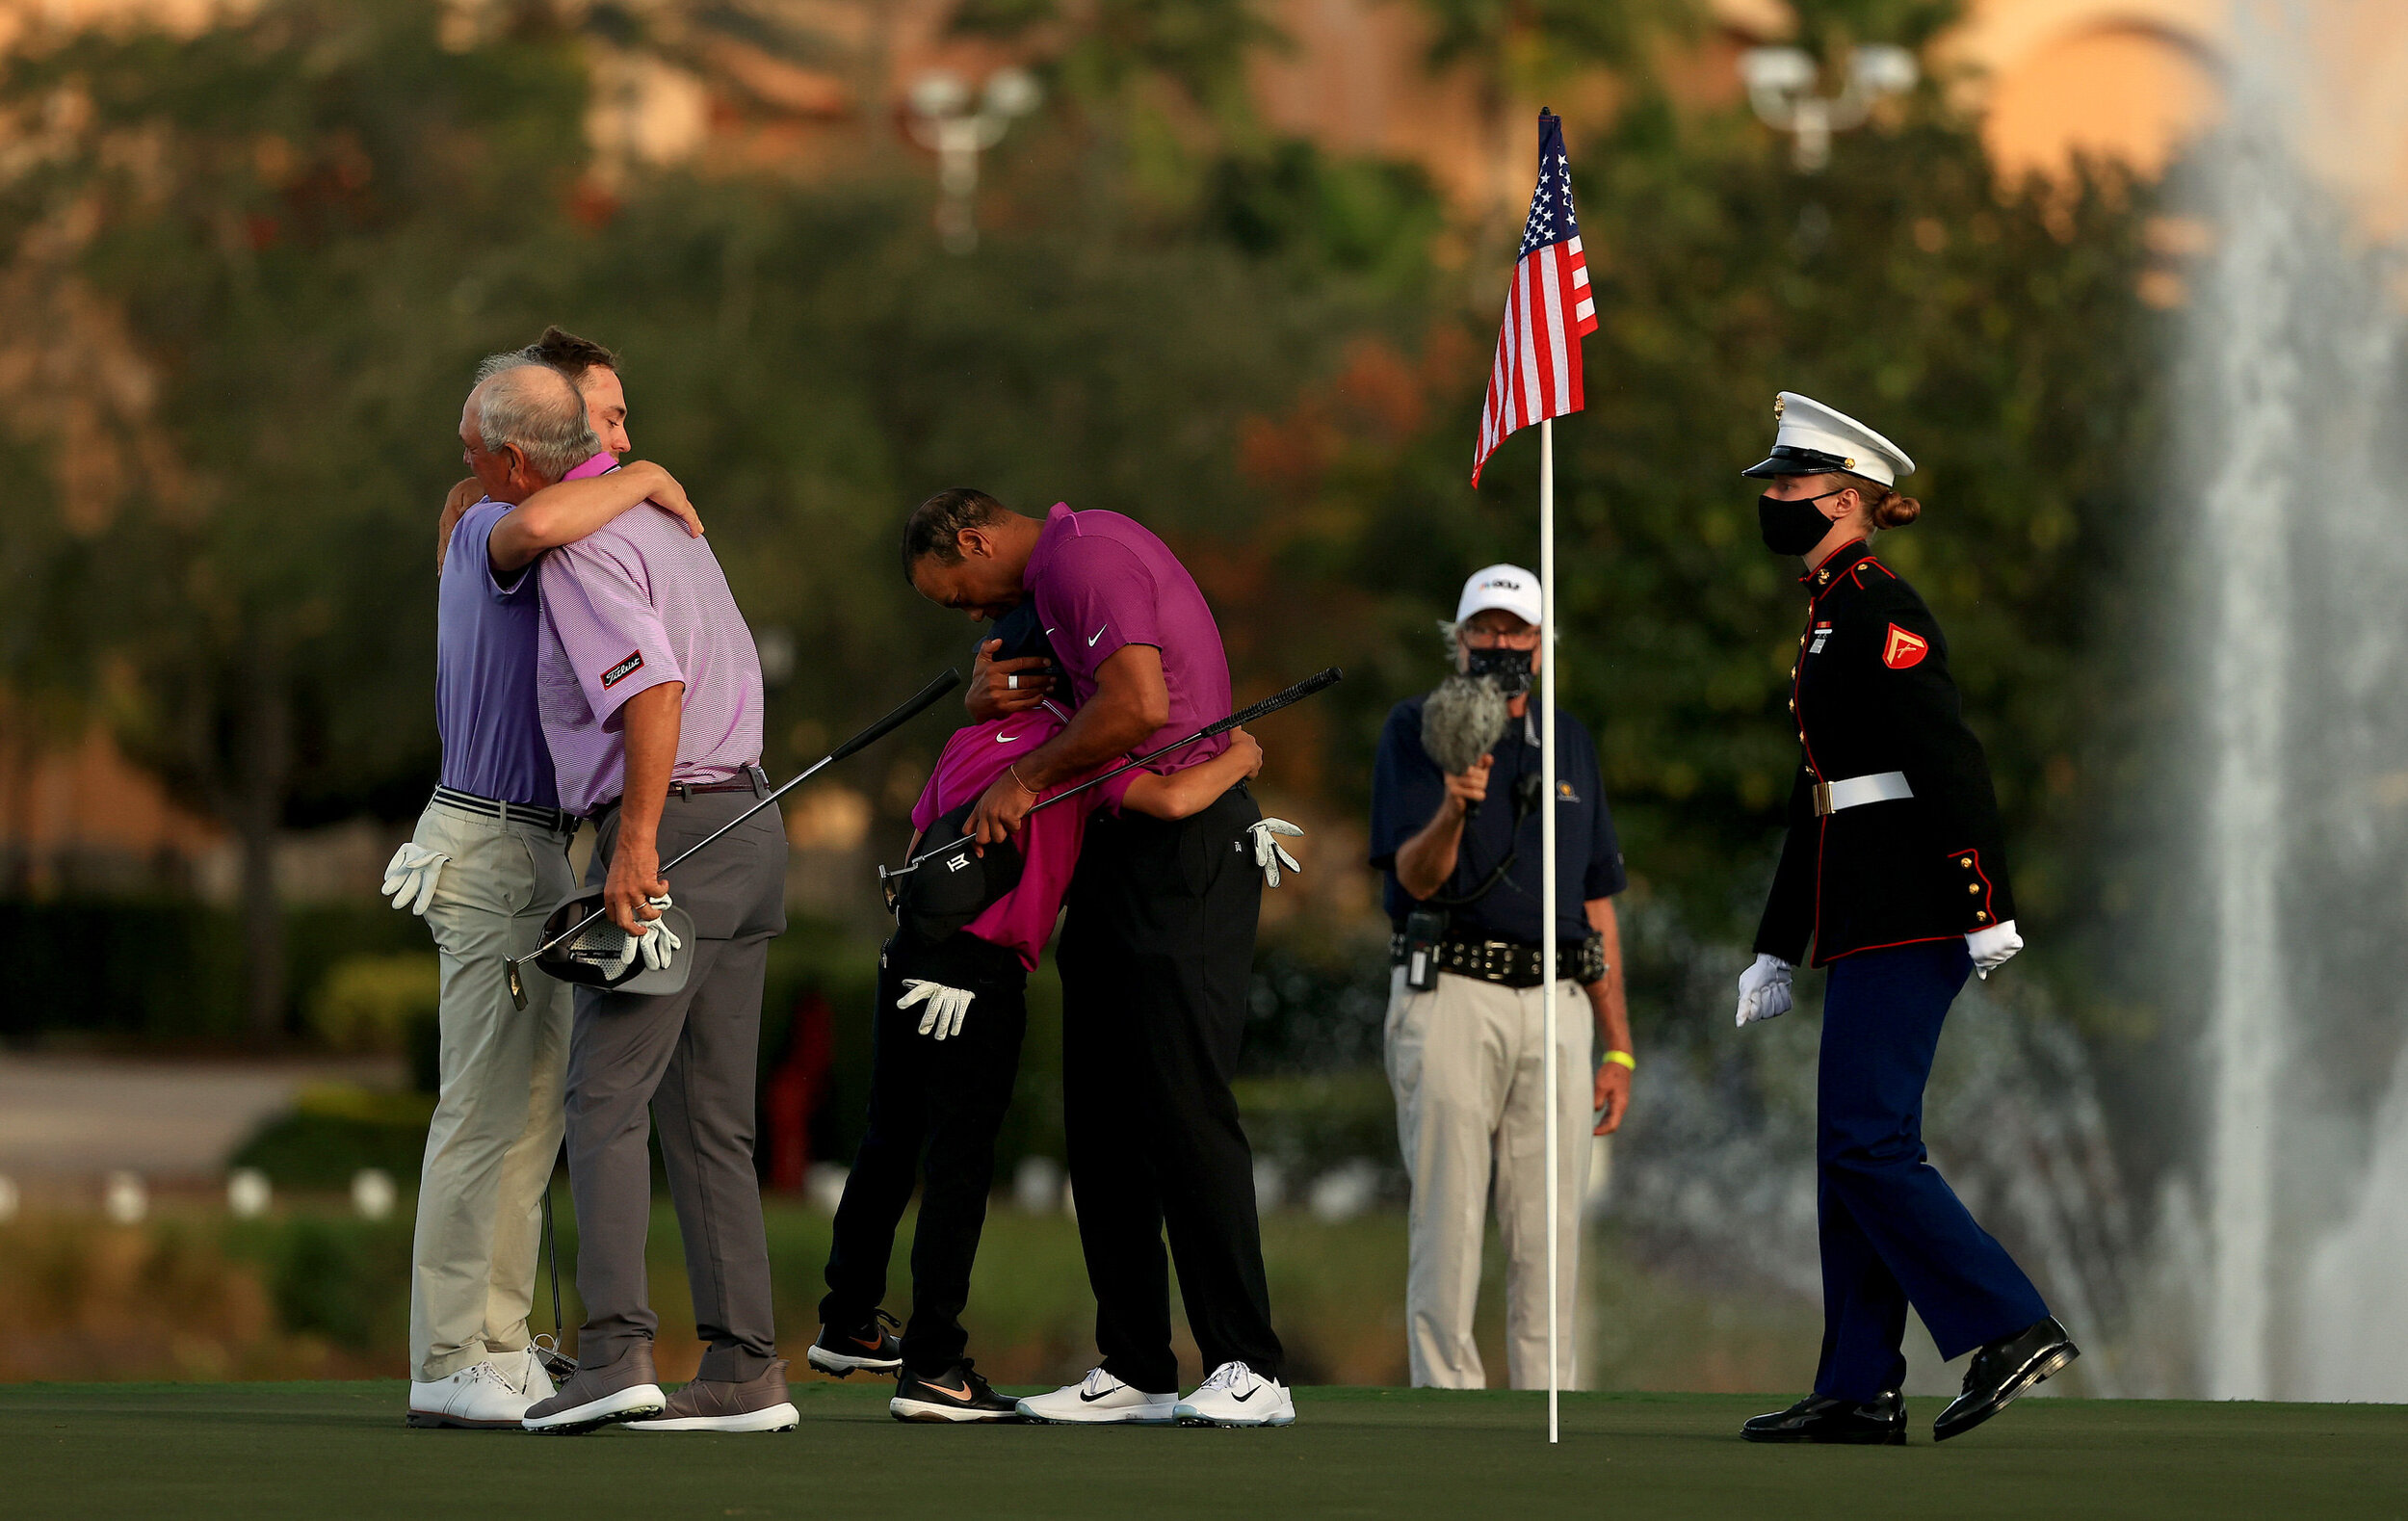  ORLANDO, FLORIDA - DECEMBER 19: Tiger Woods of the United States hugs son Charlie Woods as  Justin Thomas of the United States hugs dad Mike Thomas on the 18th hole during the first round of the PNC Championship at the Ritz Carlton Golf Club on Dece